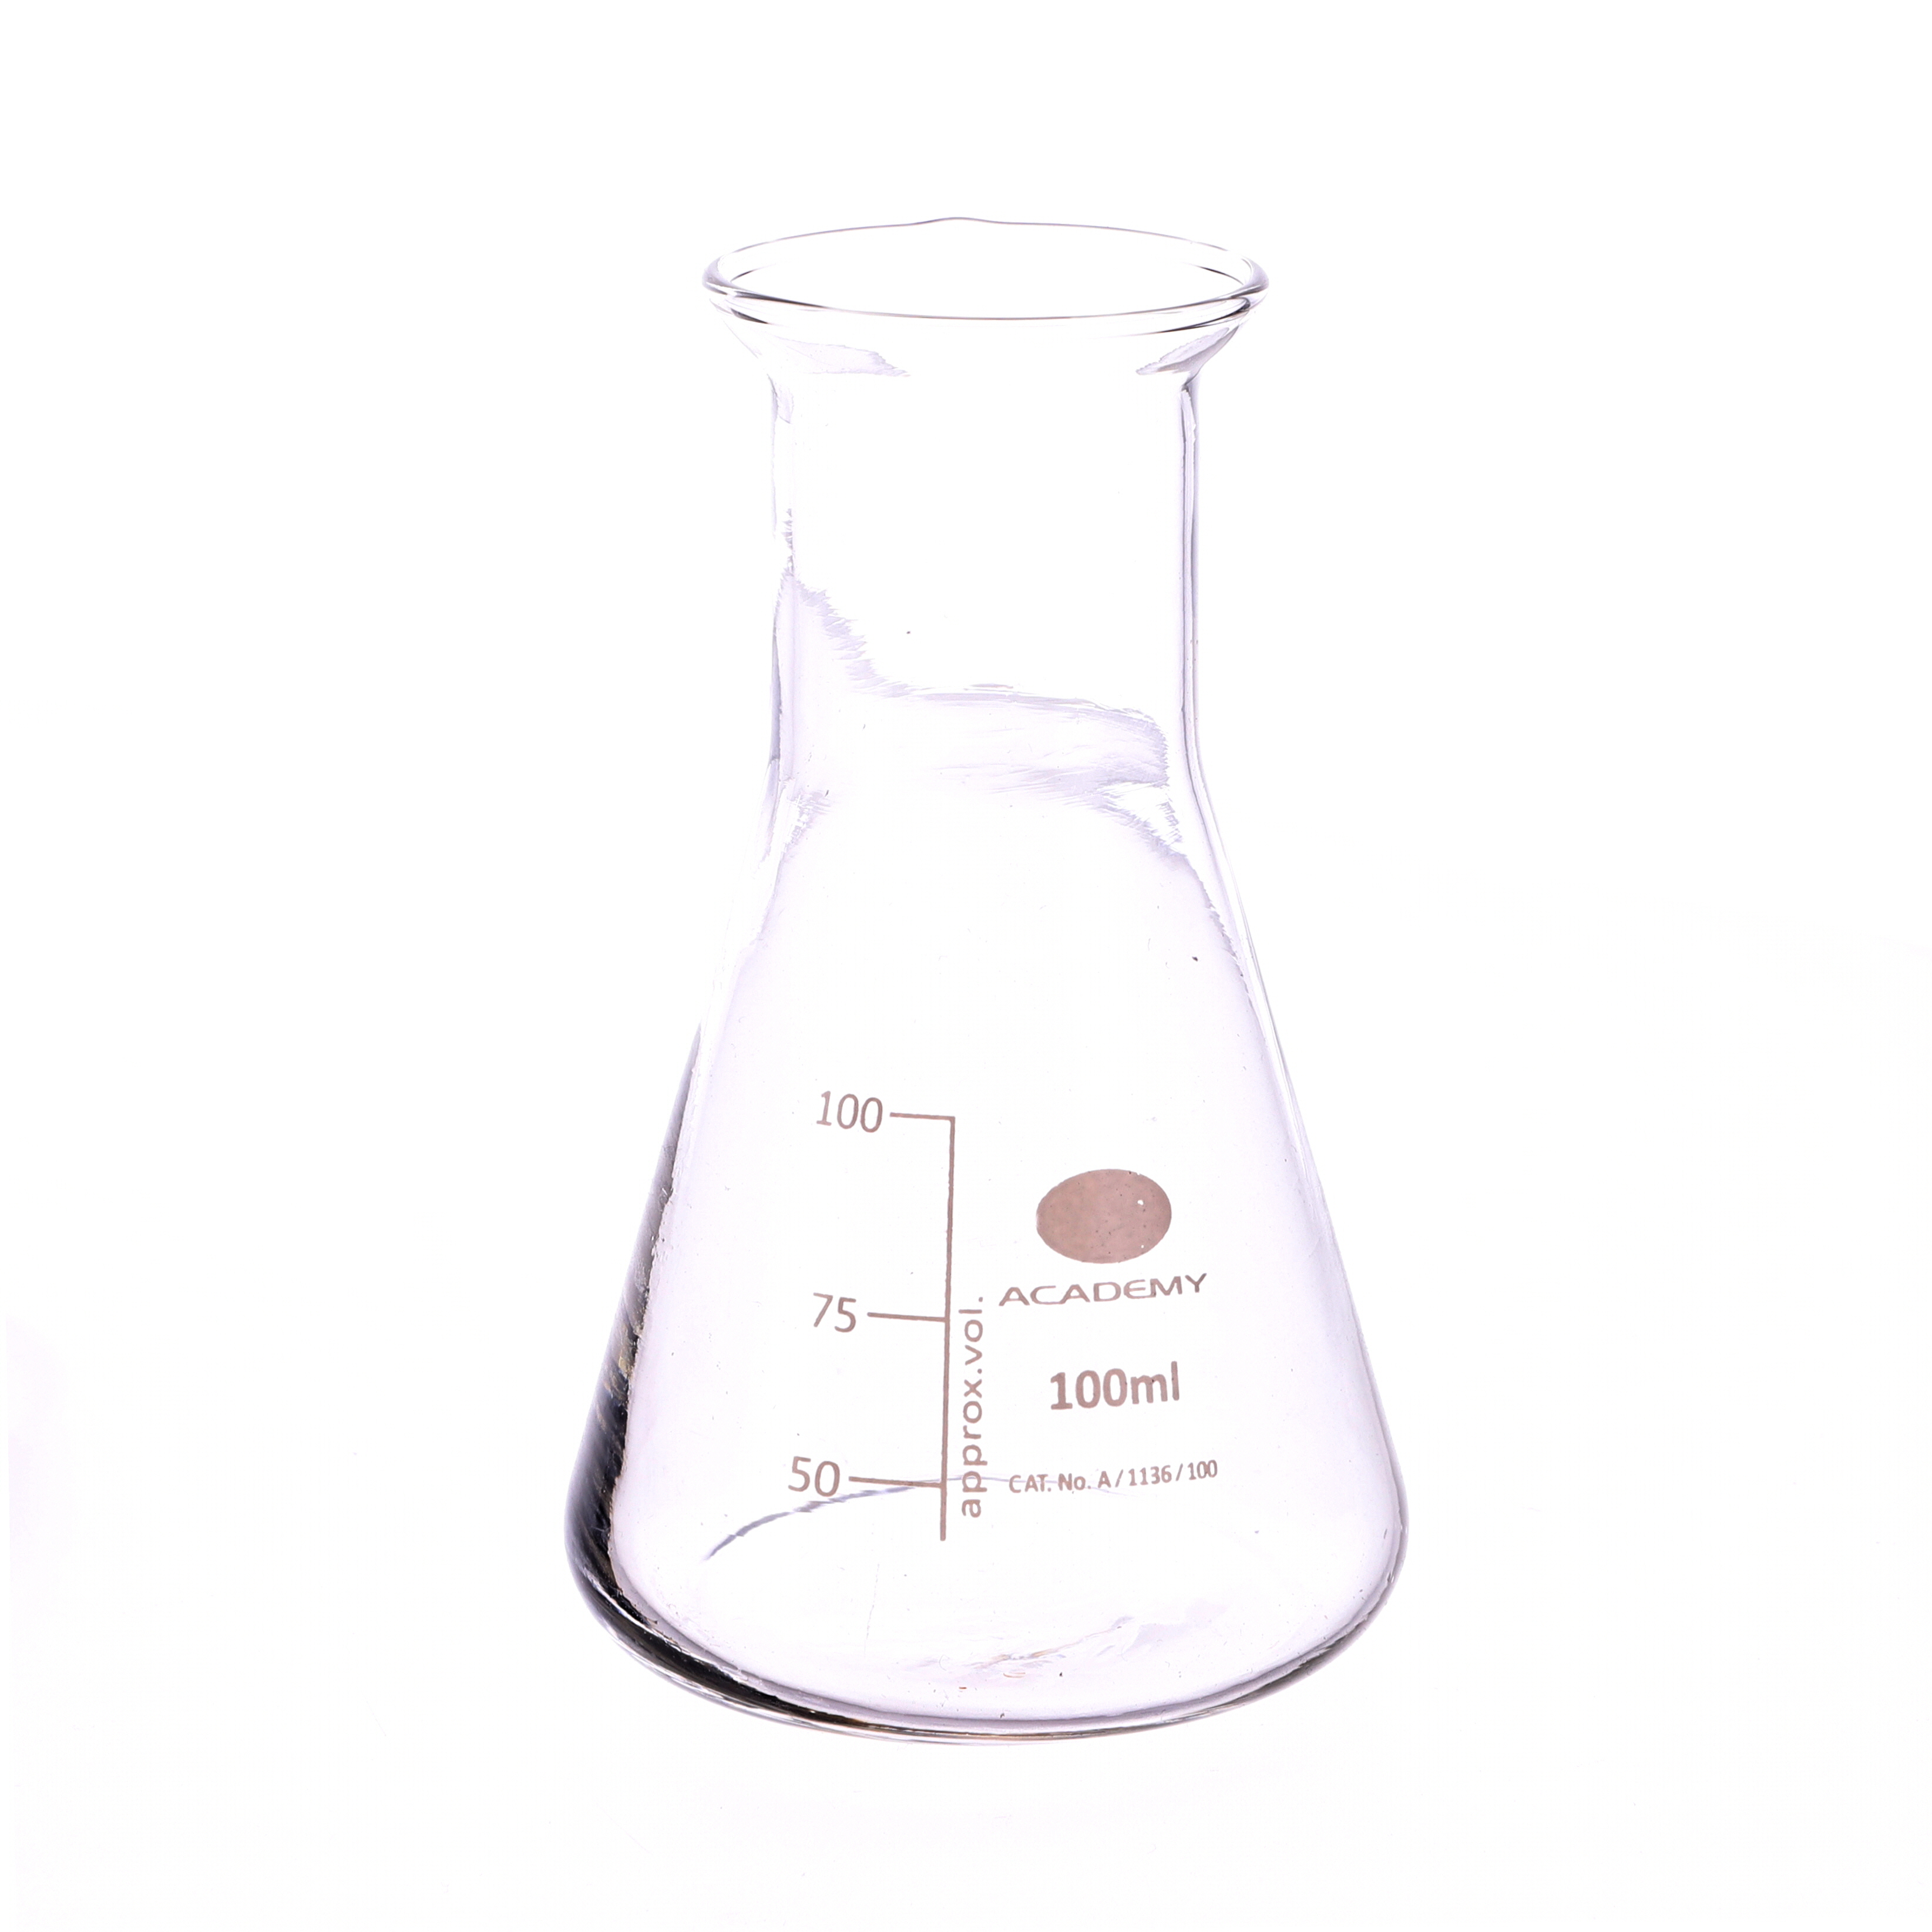 Academy NNeck Conical Flask 100ml P12